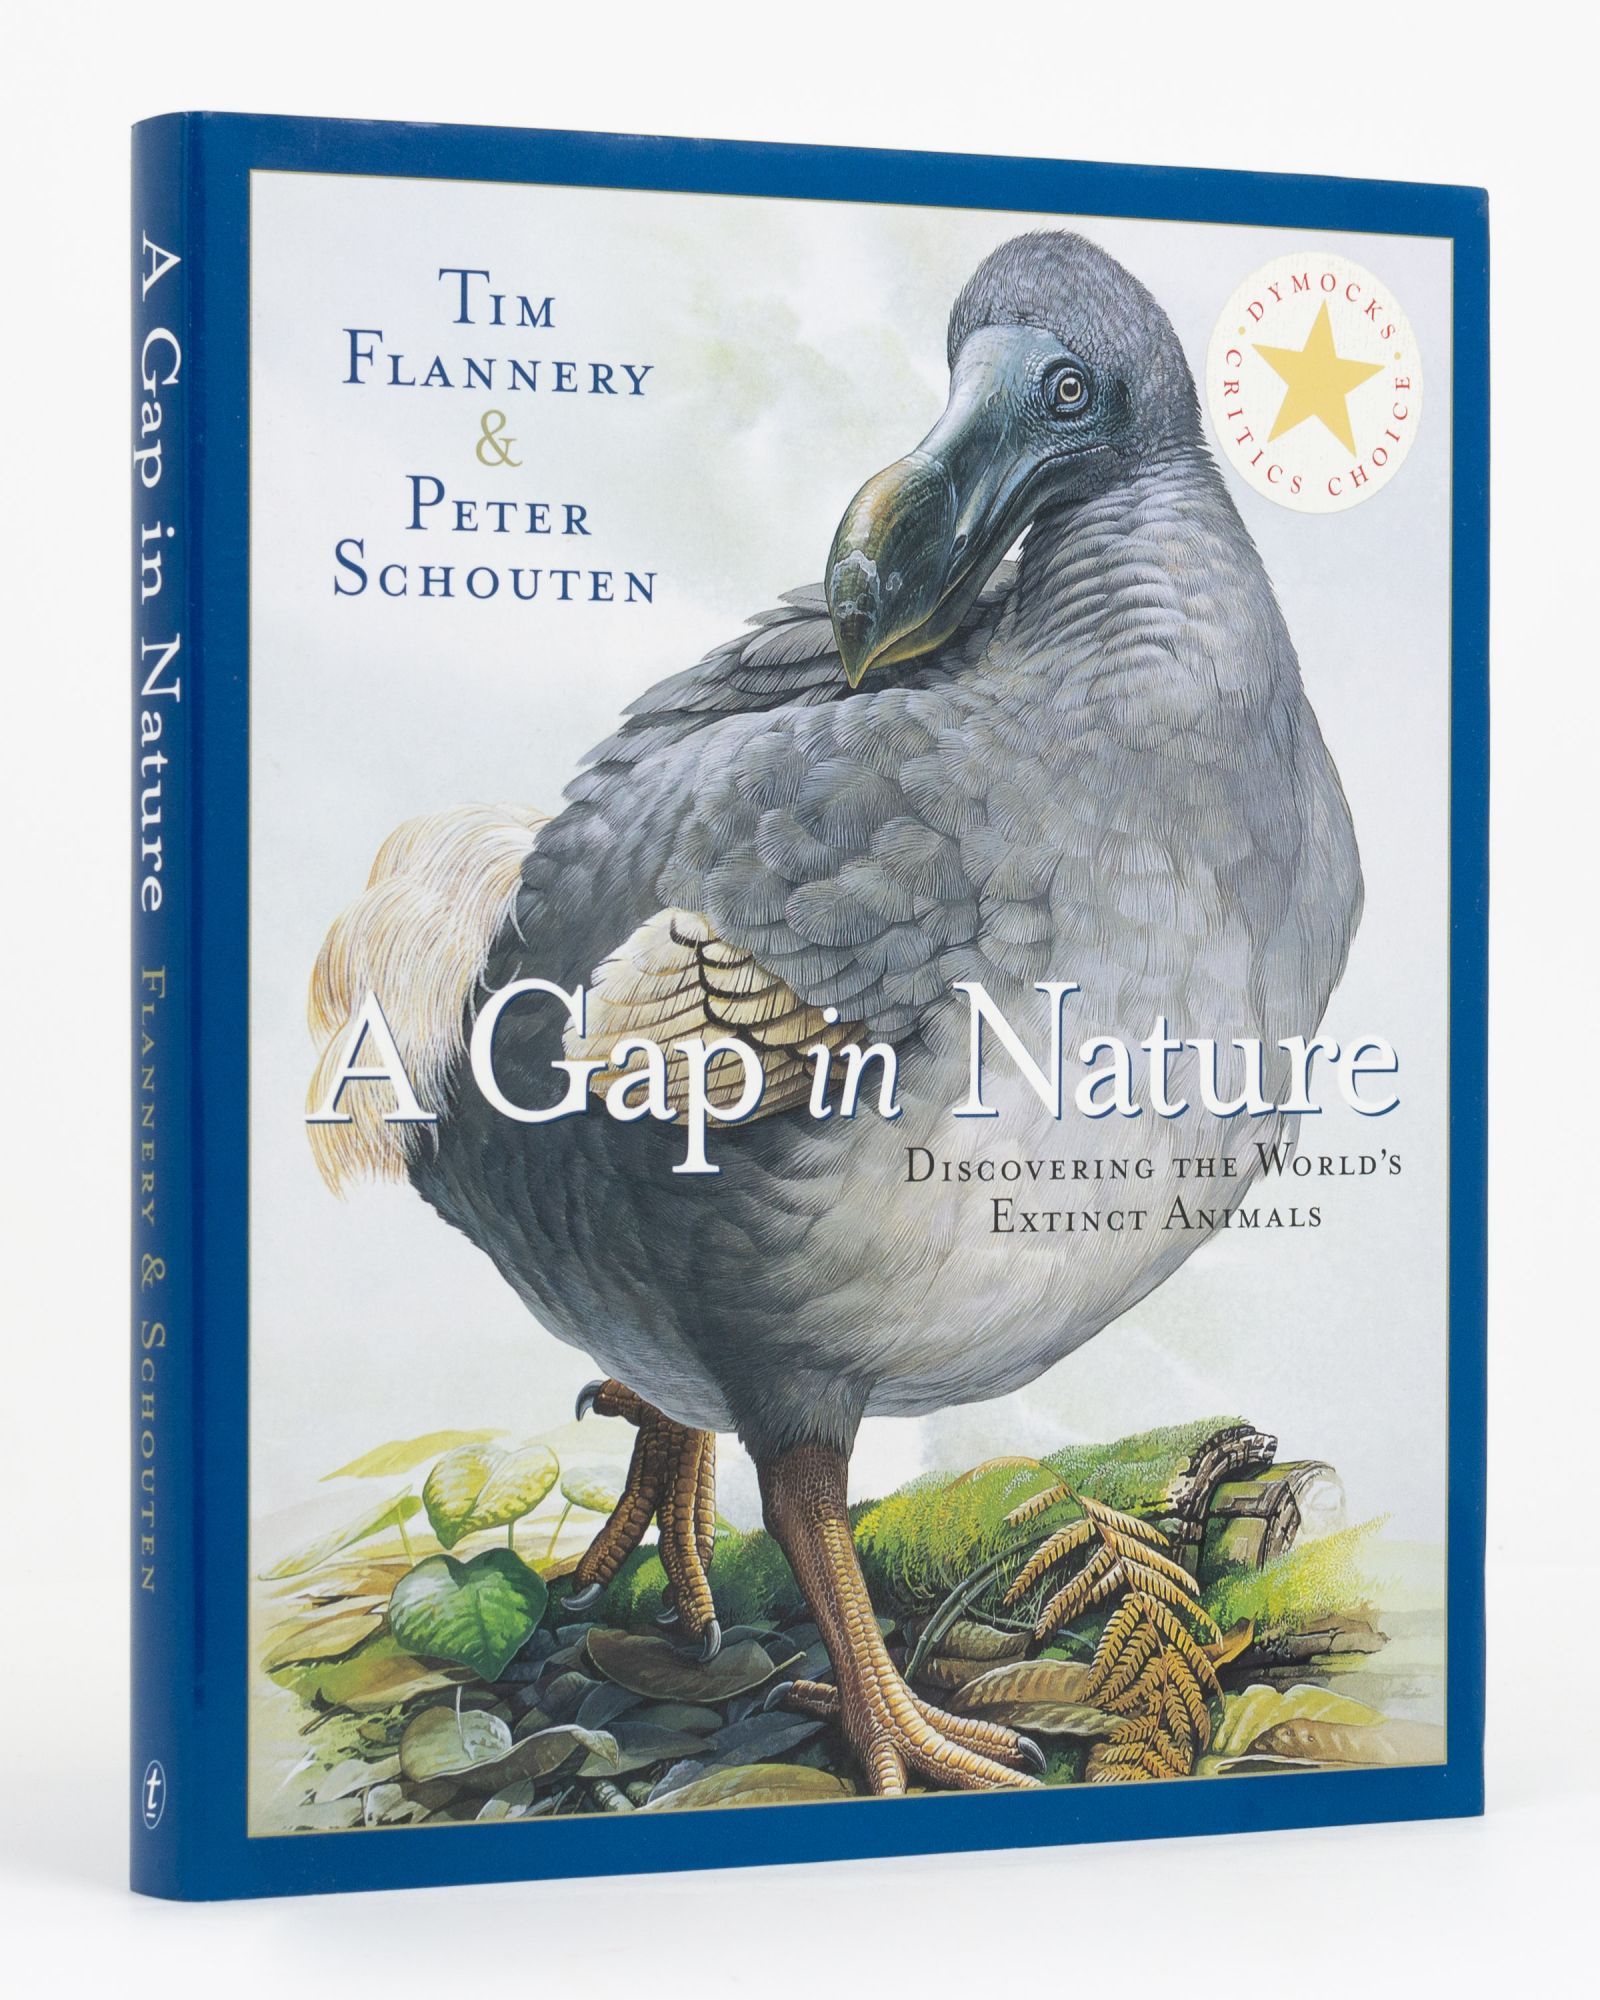 A Gap in Nature. Discovering the World's Extinct Animals - FLANNERY, Tim and Peter SCHOUTEN